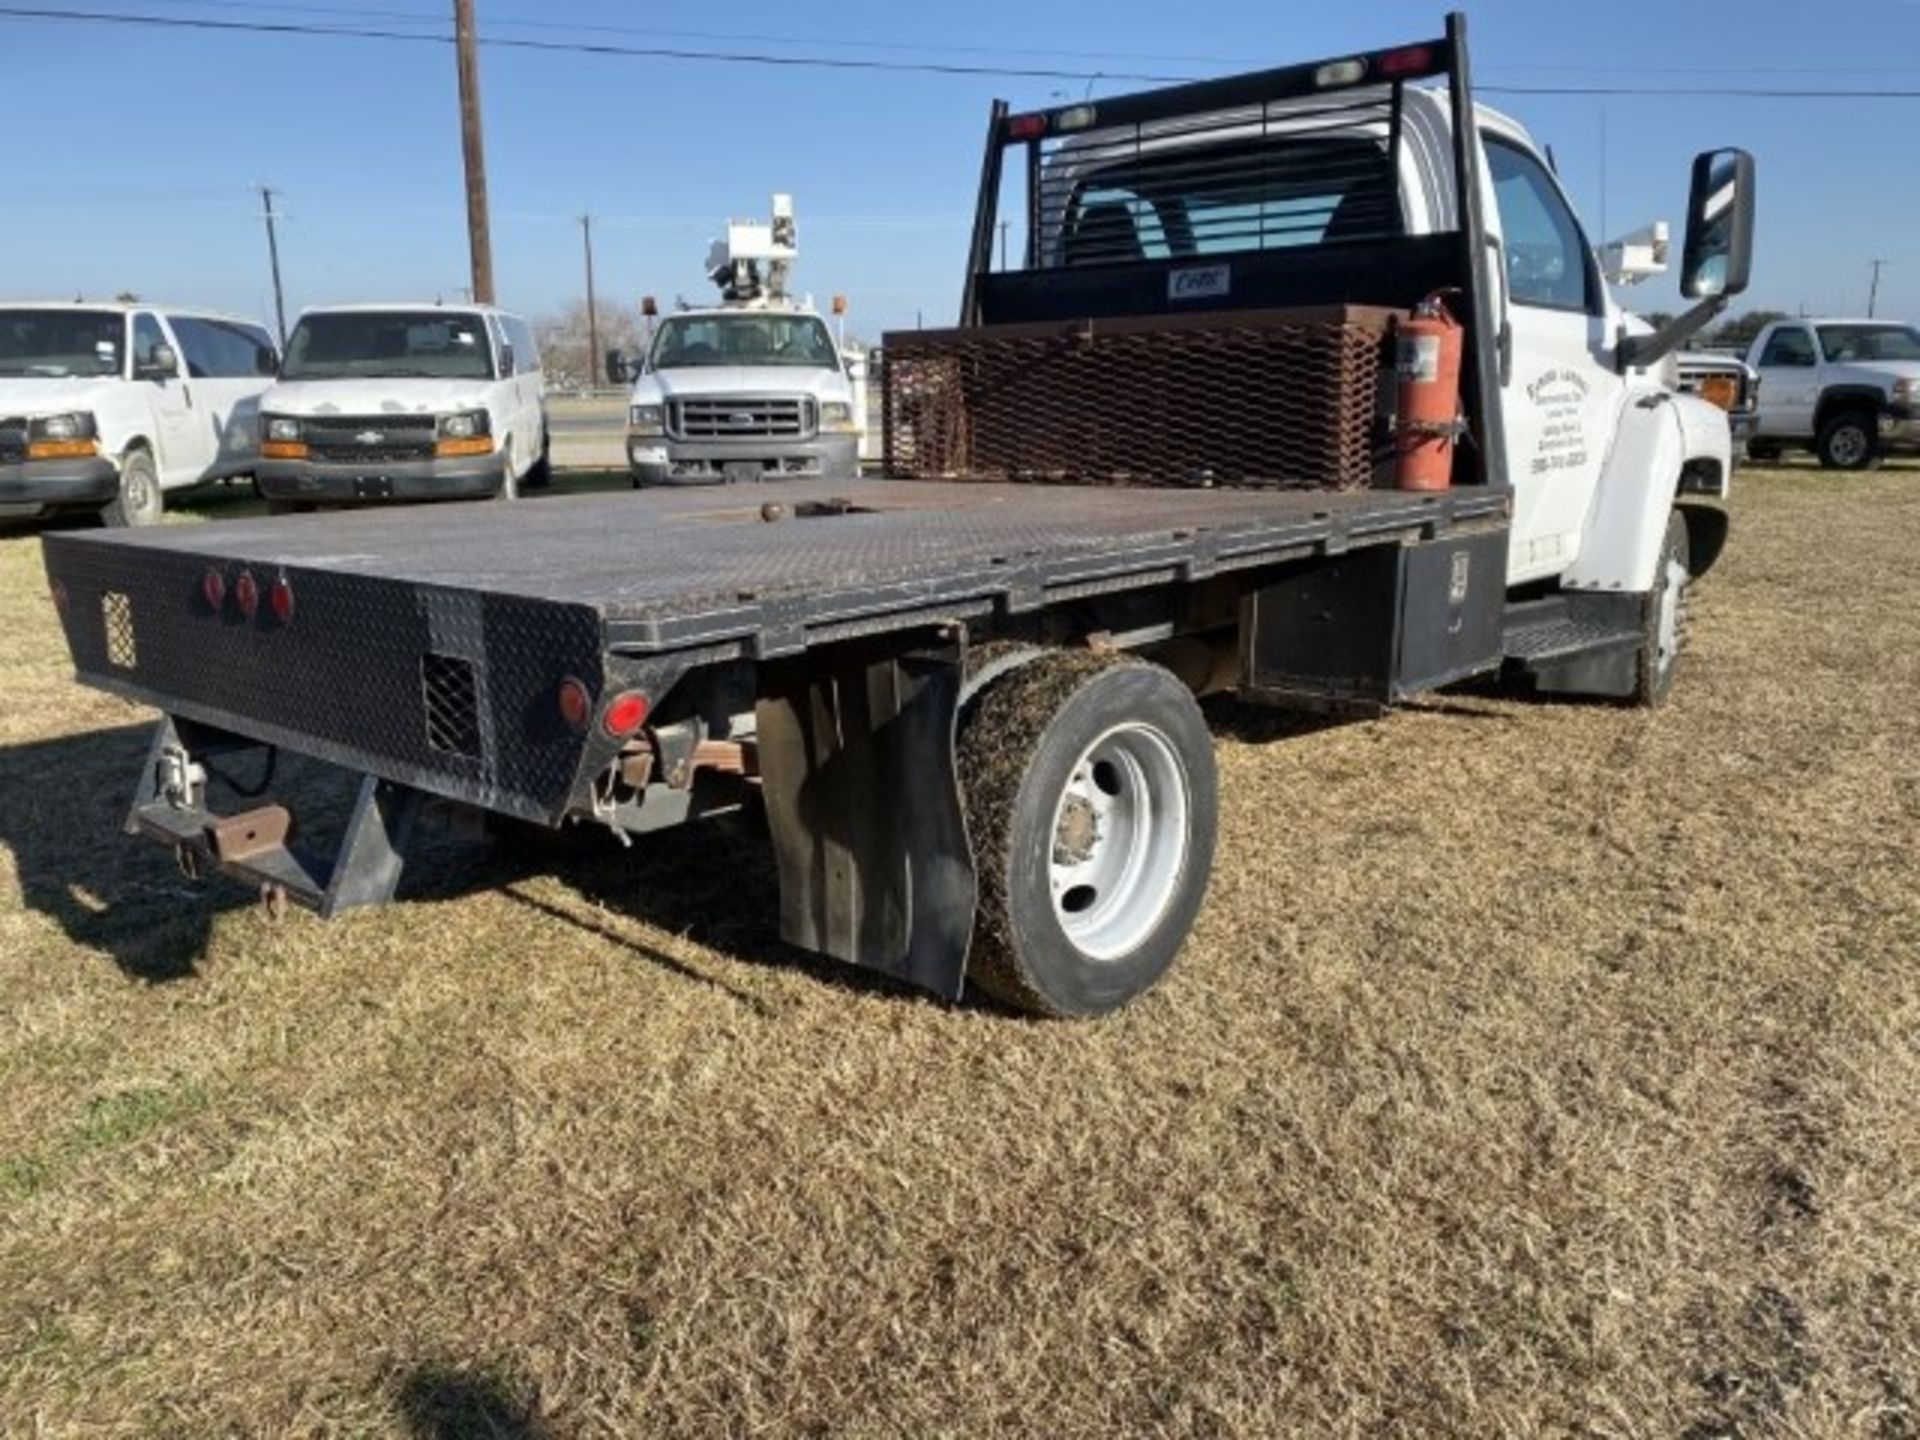 2003 Chevrolet C5500 Flatbed VIN: 1GBE5E1153F503413 Odometer States: 20314 - Image 3 of 6